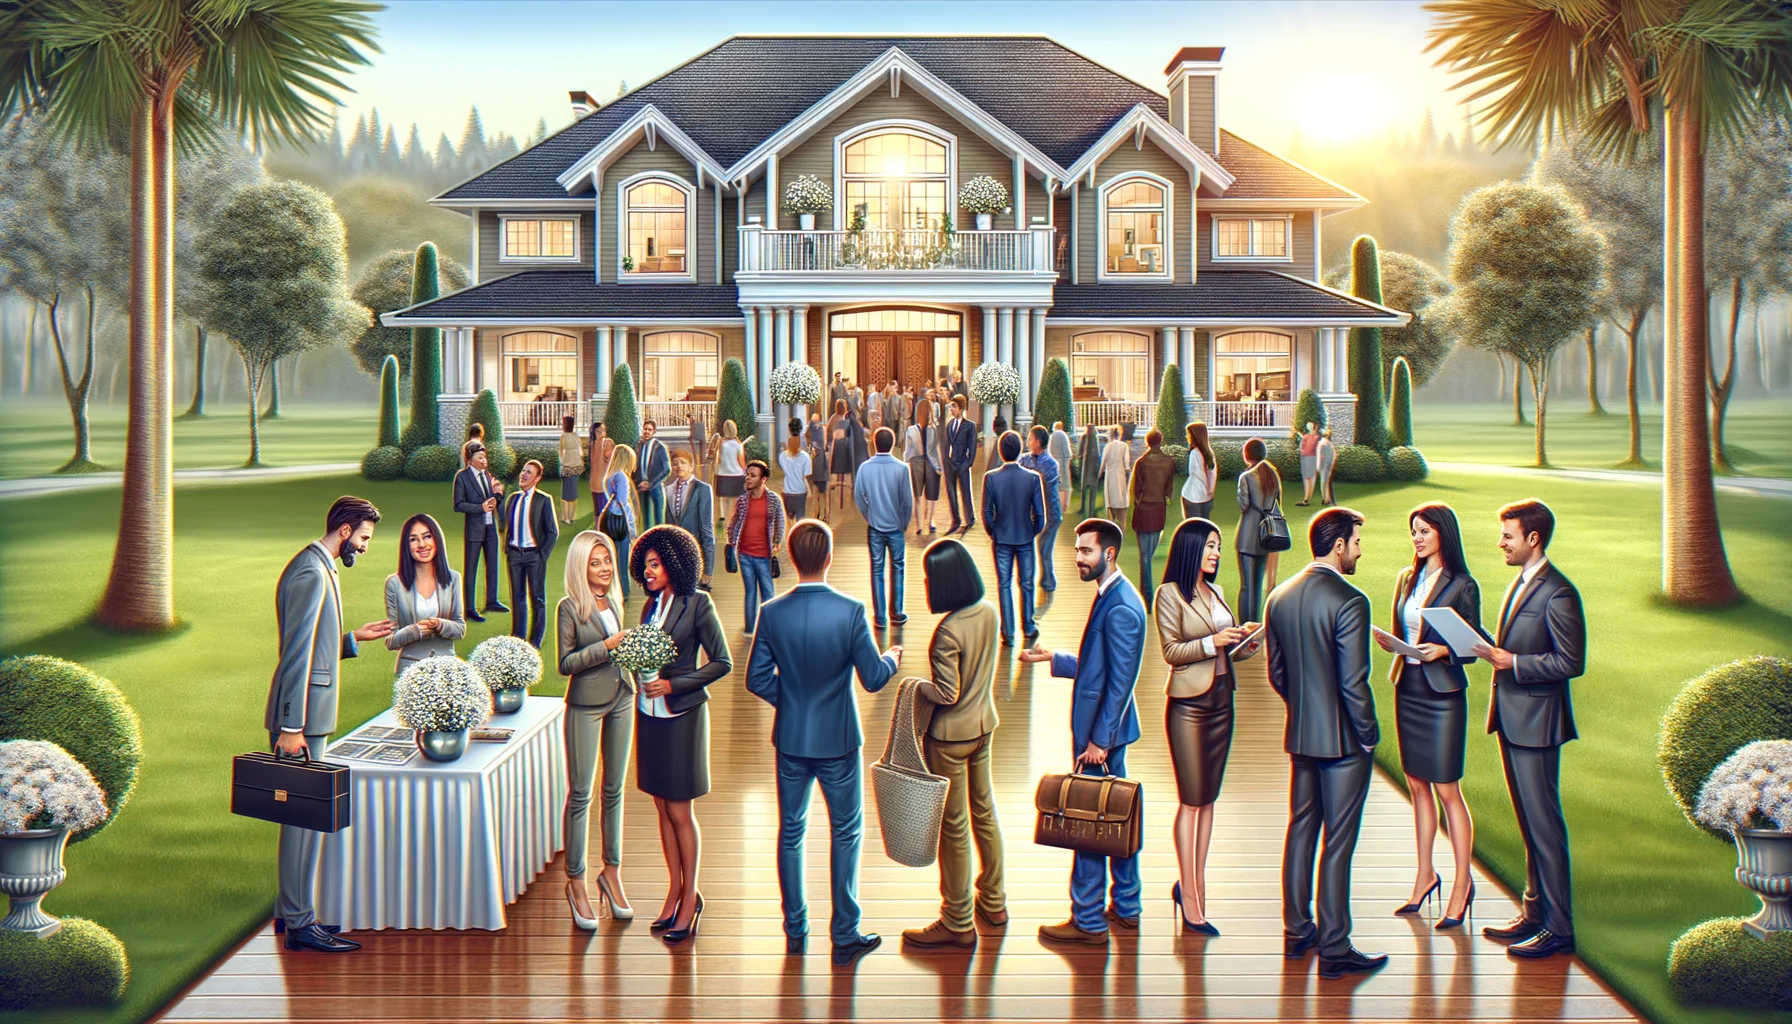 Create a lighthearted, realistic image featuring a scene that real estate agents would consider ideal. Picture a bustling open house event, with people of various genders and different descents such as Caucasian, Hispanic, Black, Middle-Eastern, and South Asian showing interest in a stunning, luxurious house. The agents (a balanced mix of males and females) are all smiles as they successfully negotiate deals. There's an atmosphere of prosperity, positivity and everyone's excitement is visible. Decorations are sophisticated, the house is gleaming from floor to ceiling, the sun is shining through large windows onto polished hardwood floors, and the beautifully manicured lawn outside is lush and green.